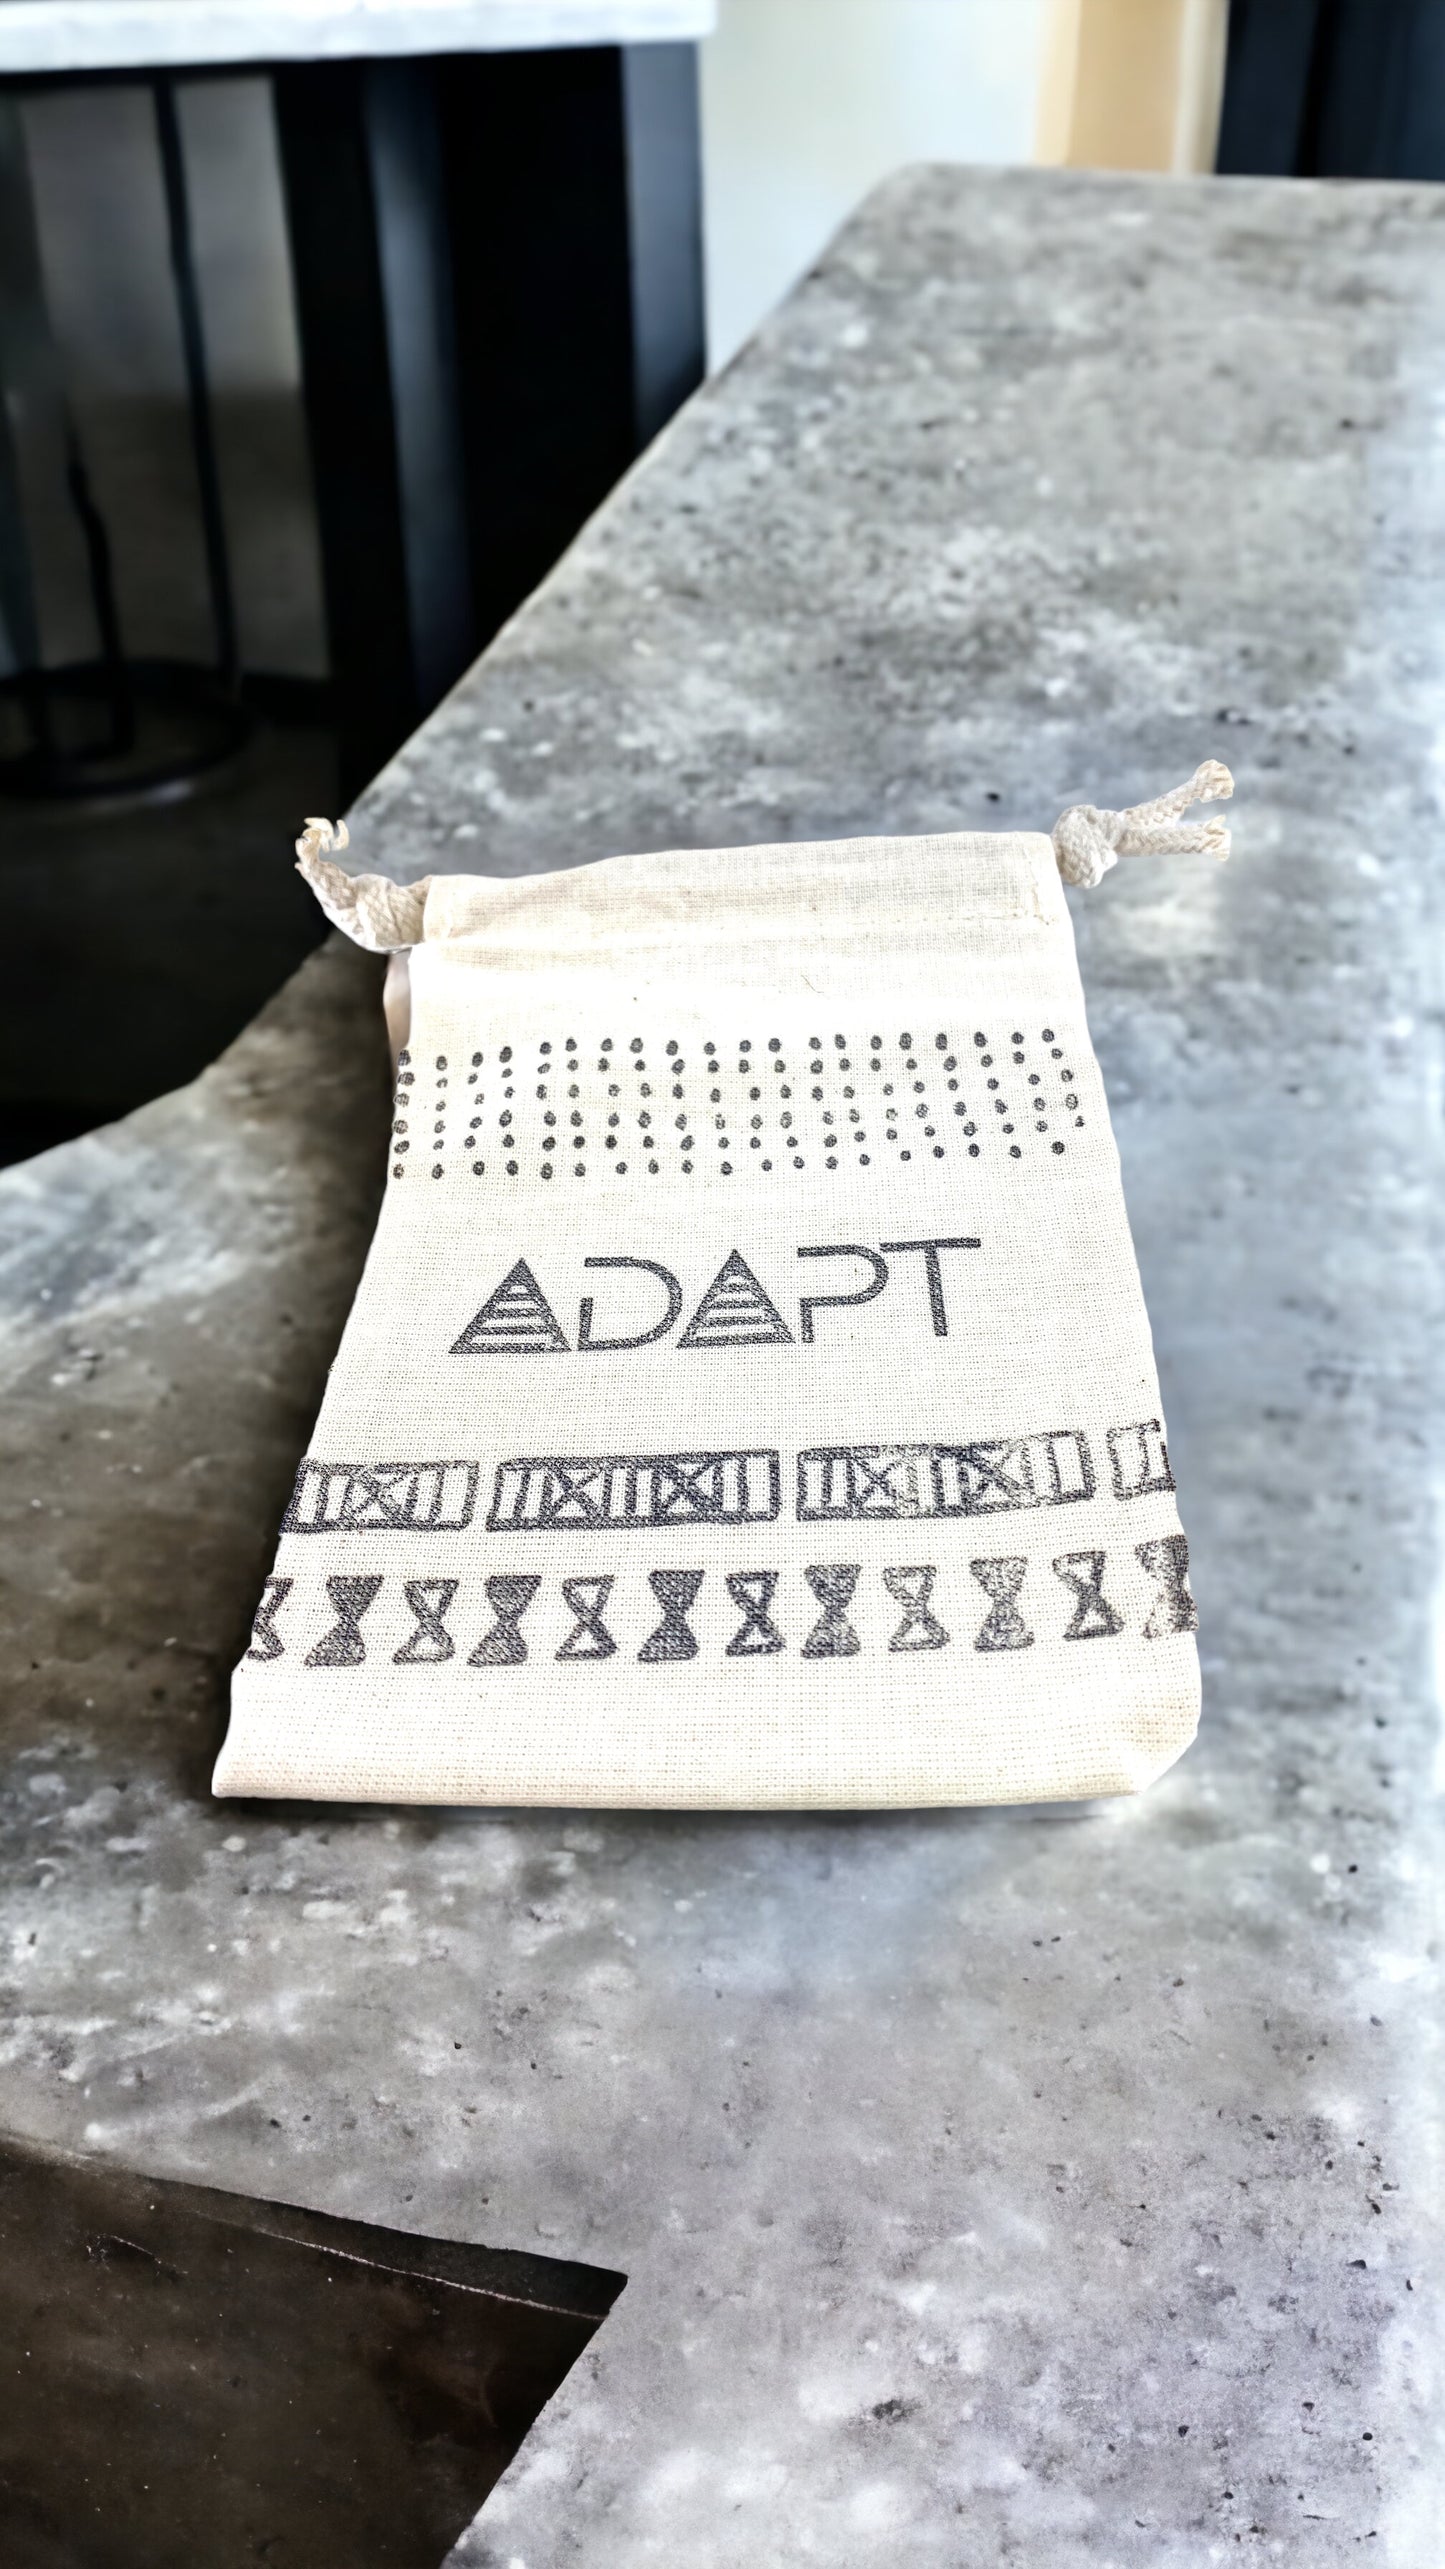 Hand Stamped, Adapt, Cotton Drawstring Pouches 4" x 6"